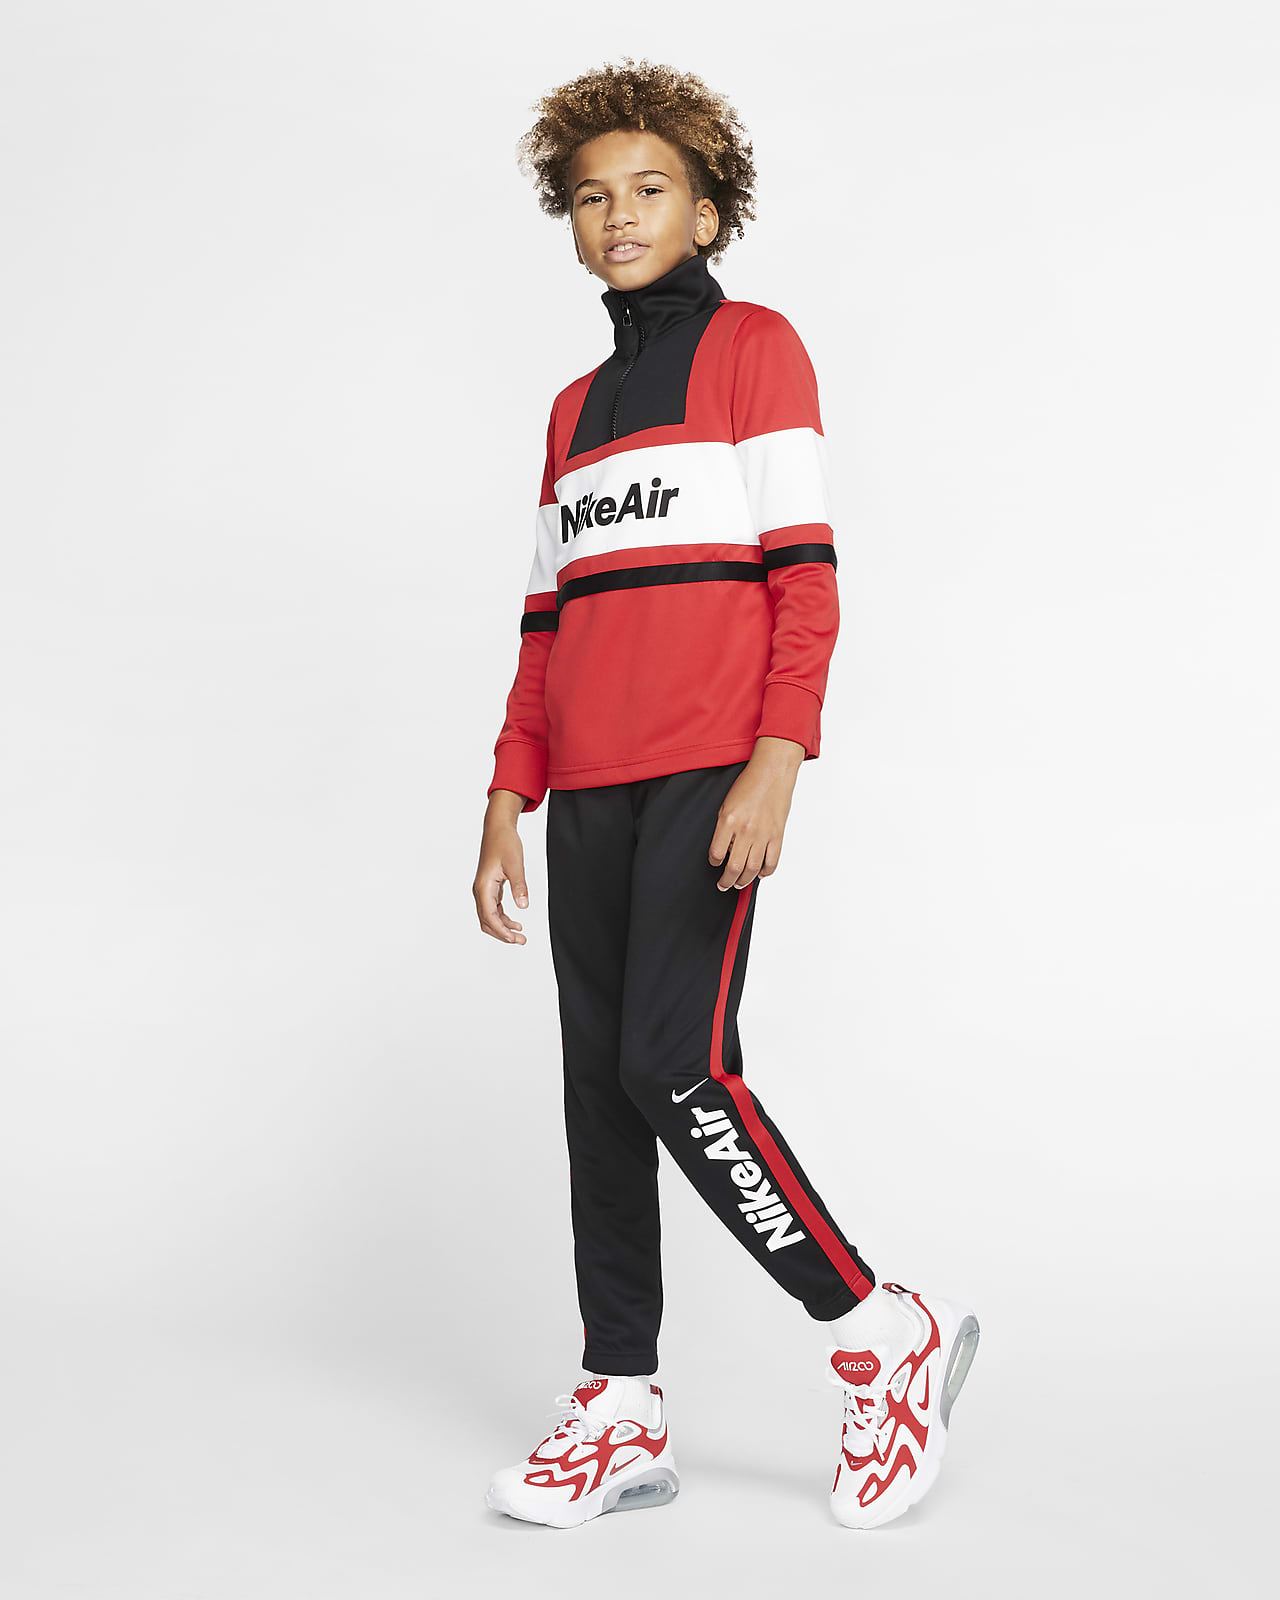 nike air tracksuit children's